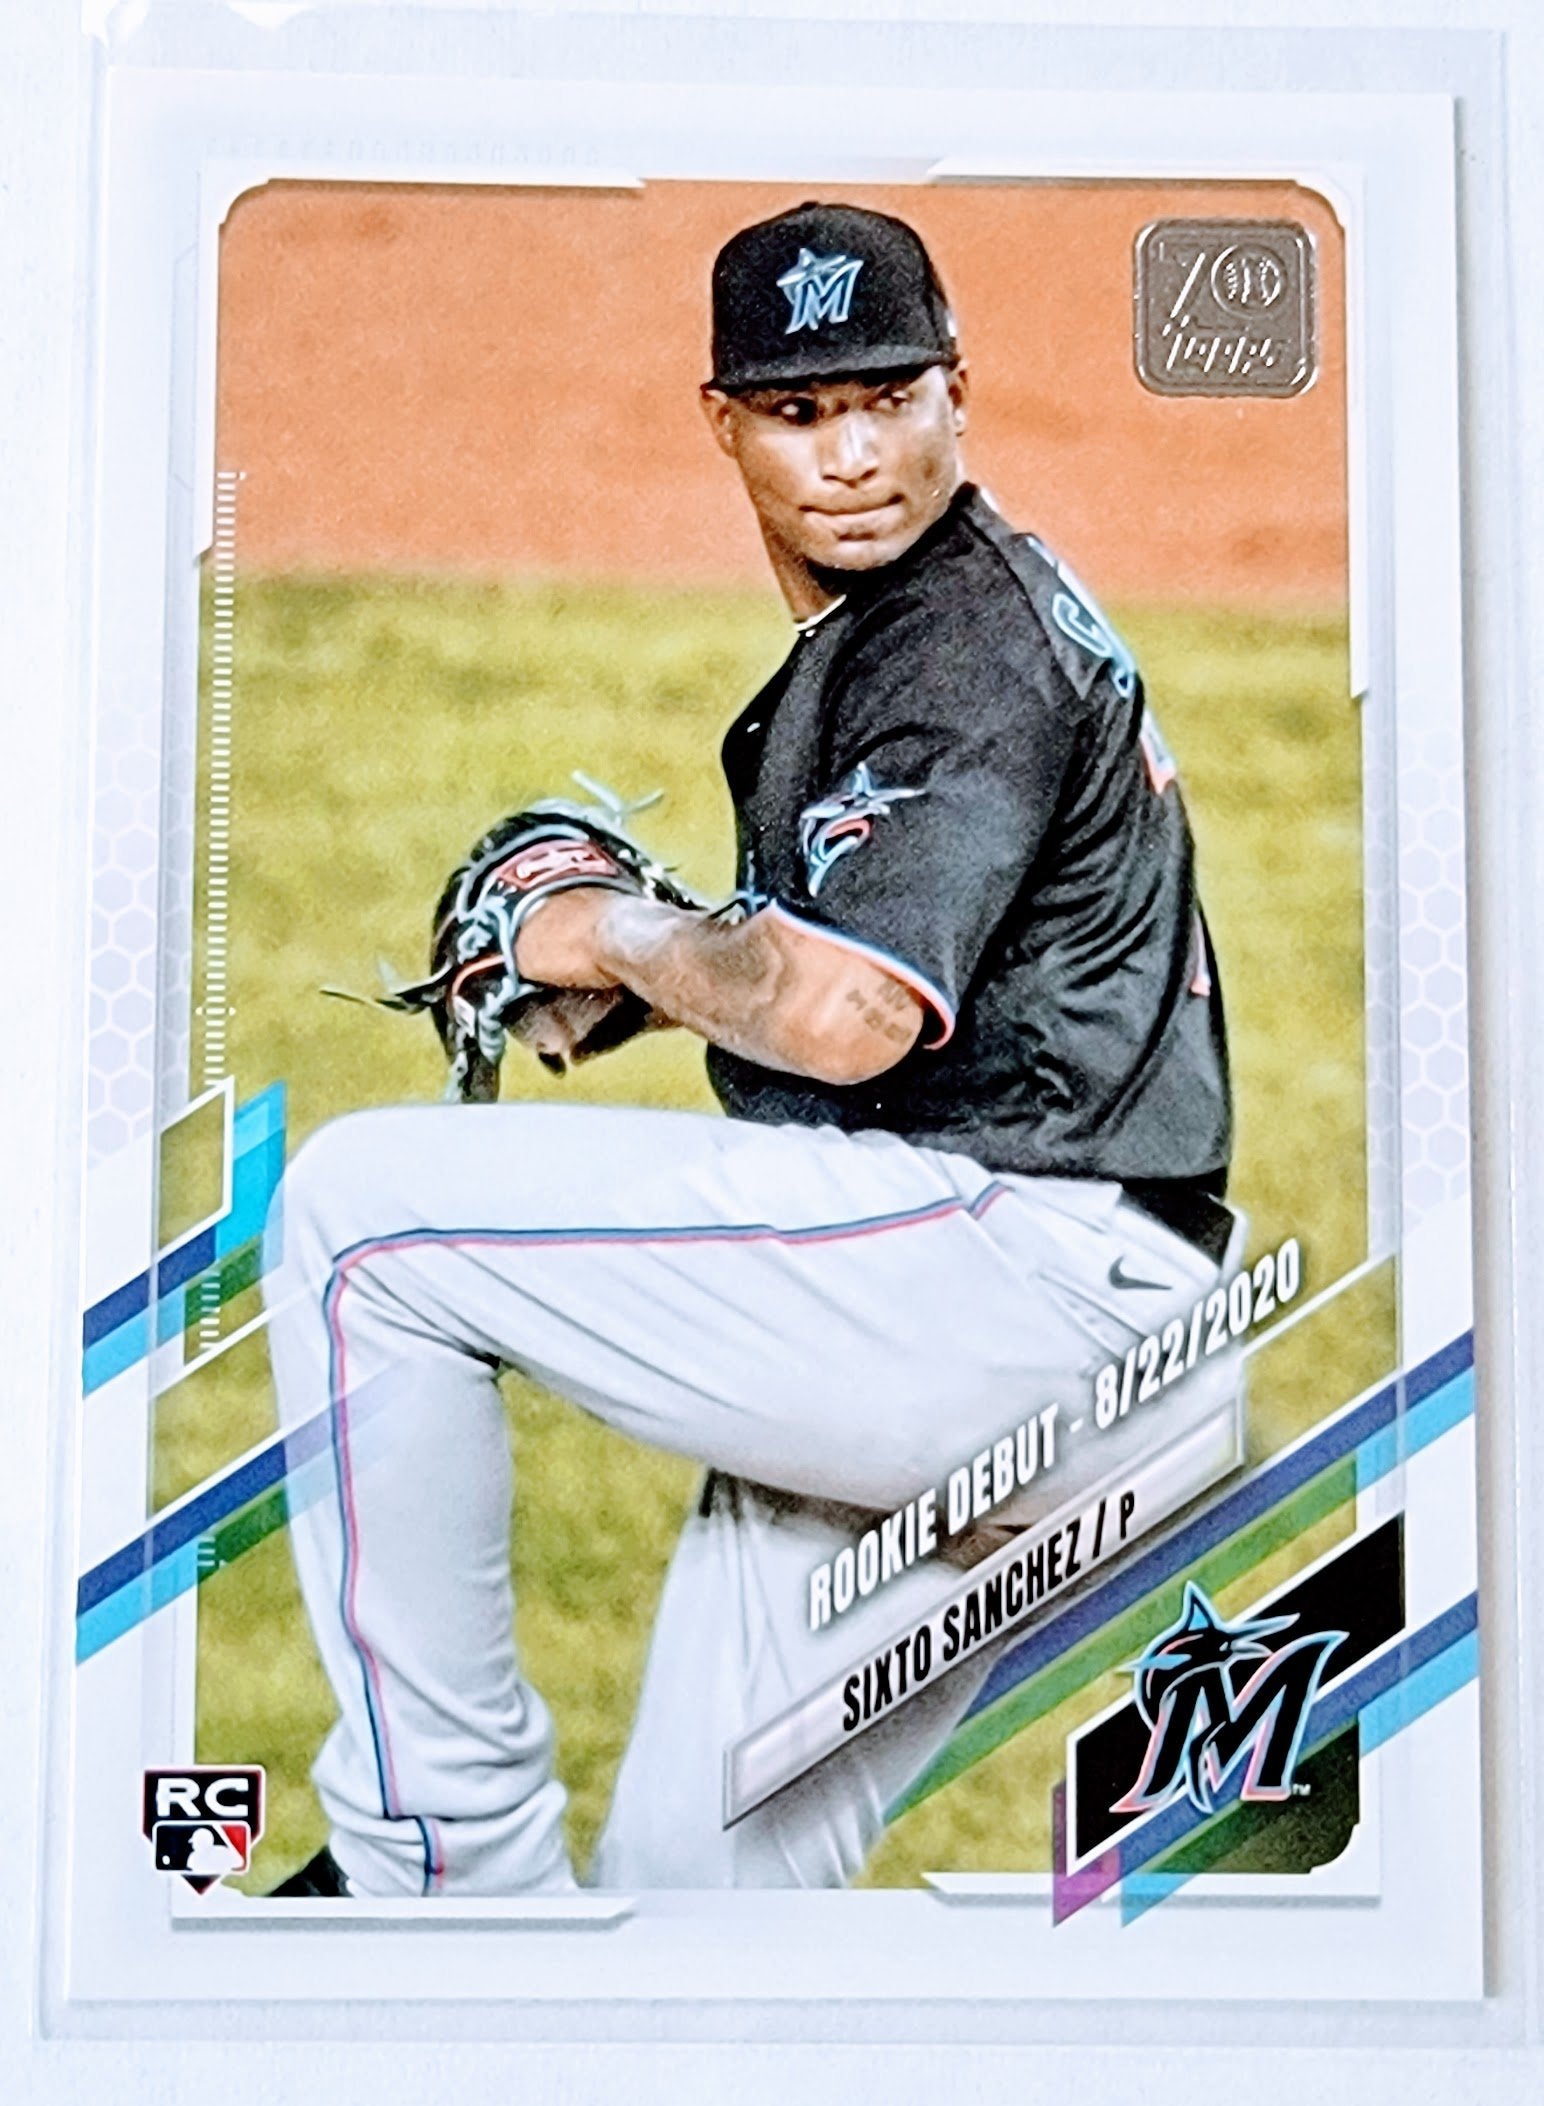 2021 Topps Update Sixto Sanchez Rookie Debut Baseball Trading Card SMCB1 simple Xclusive Collectibles   